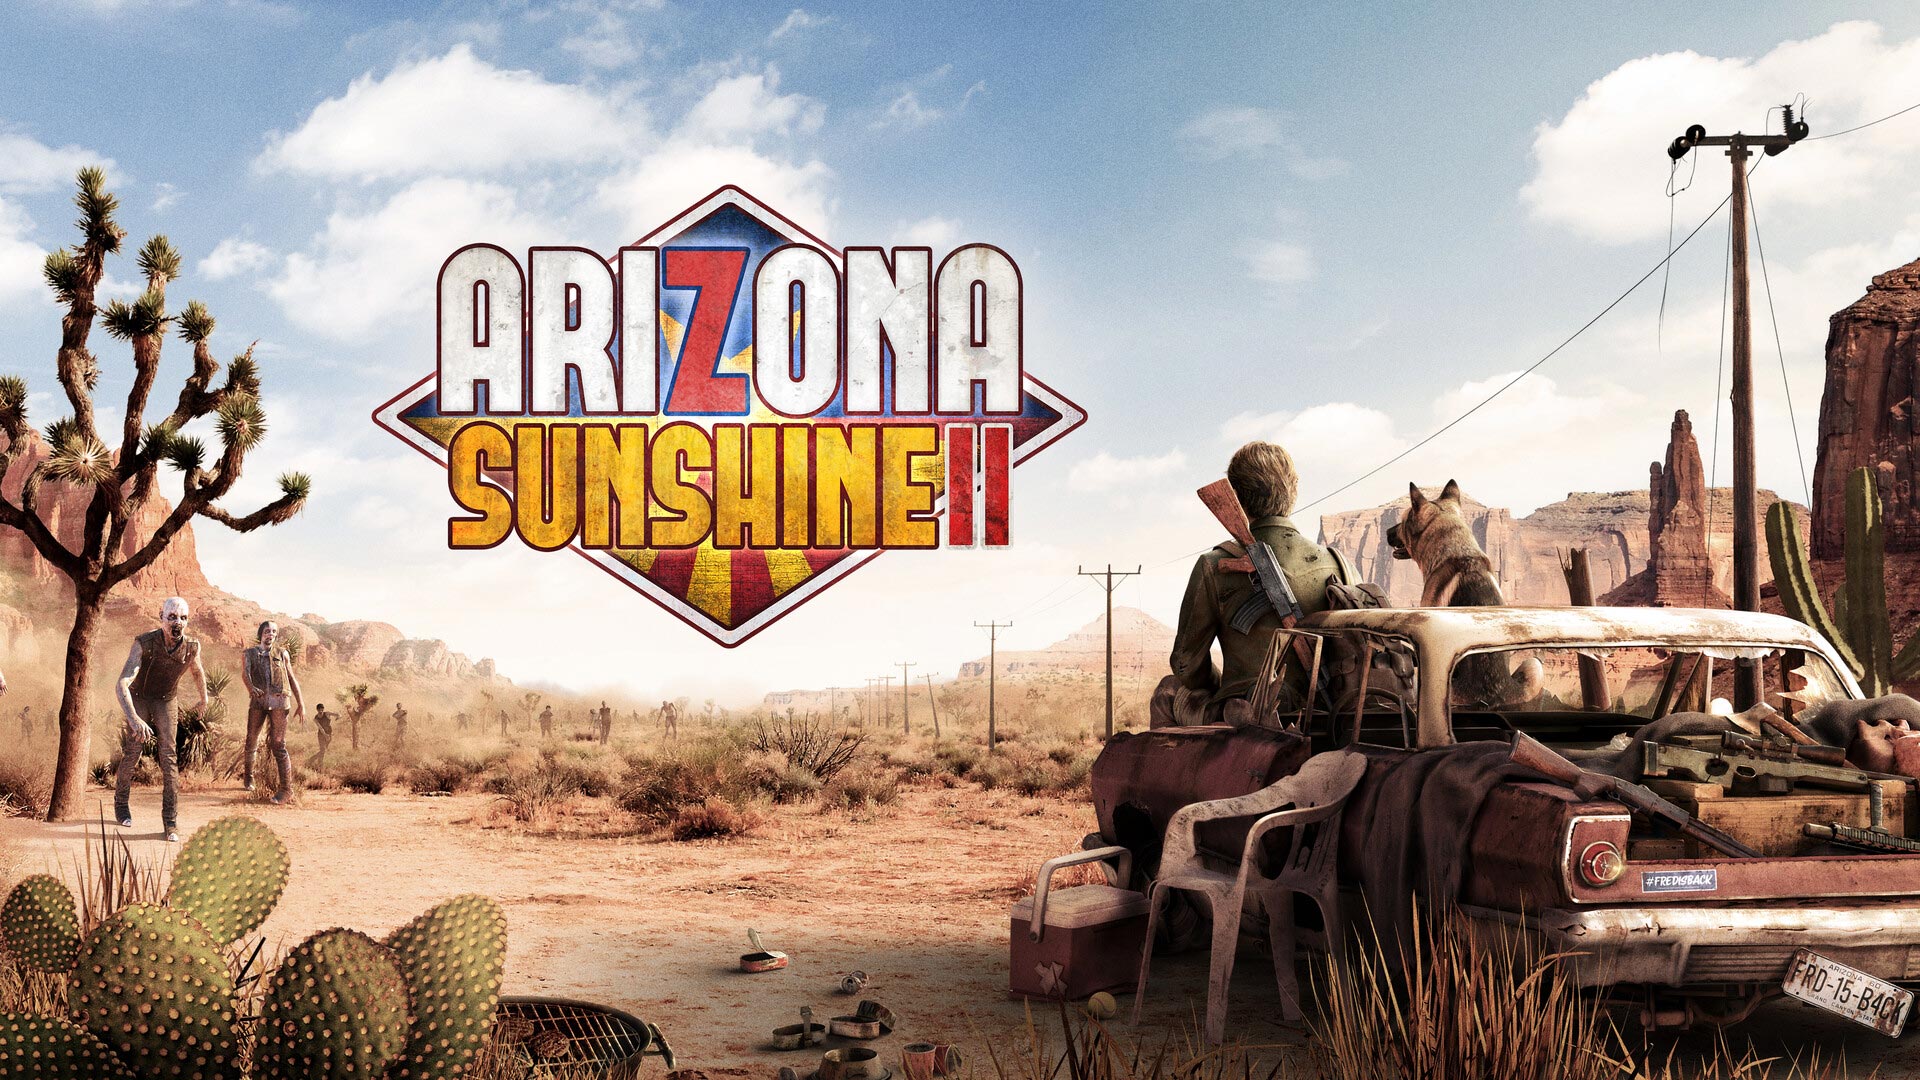 ‘Arizona Sunshine 2’ Review – Head-popping Fun With Friends